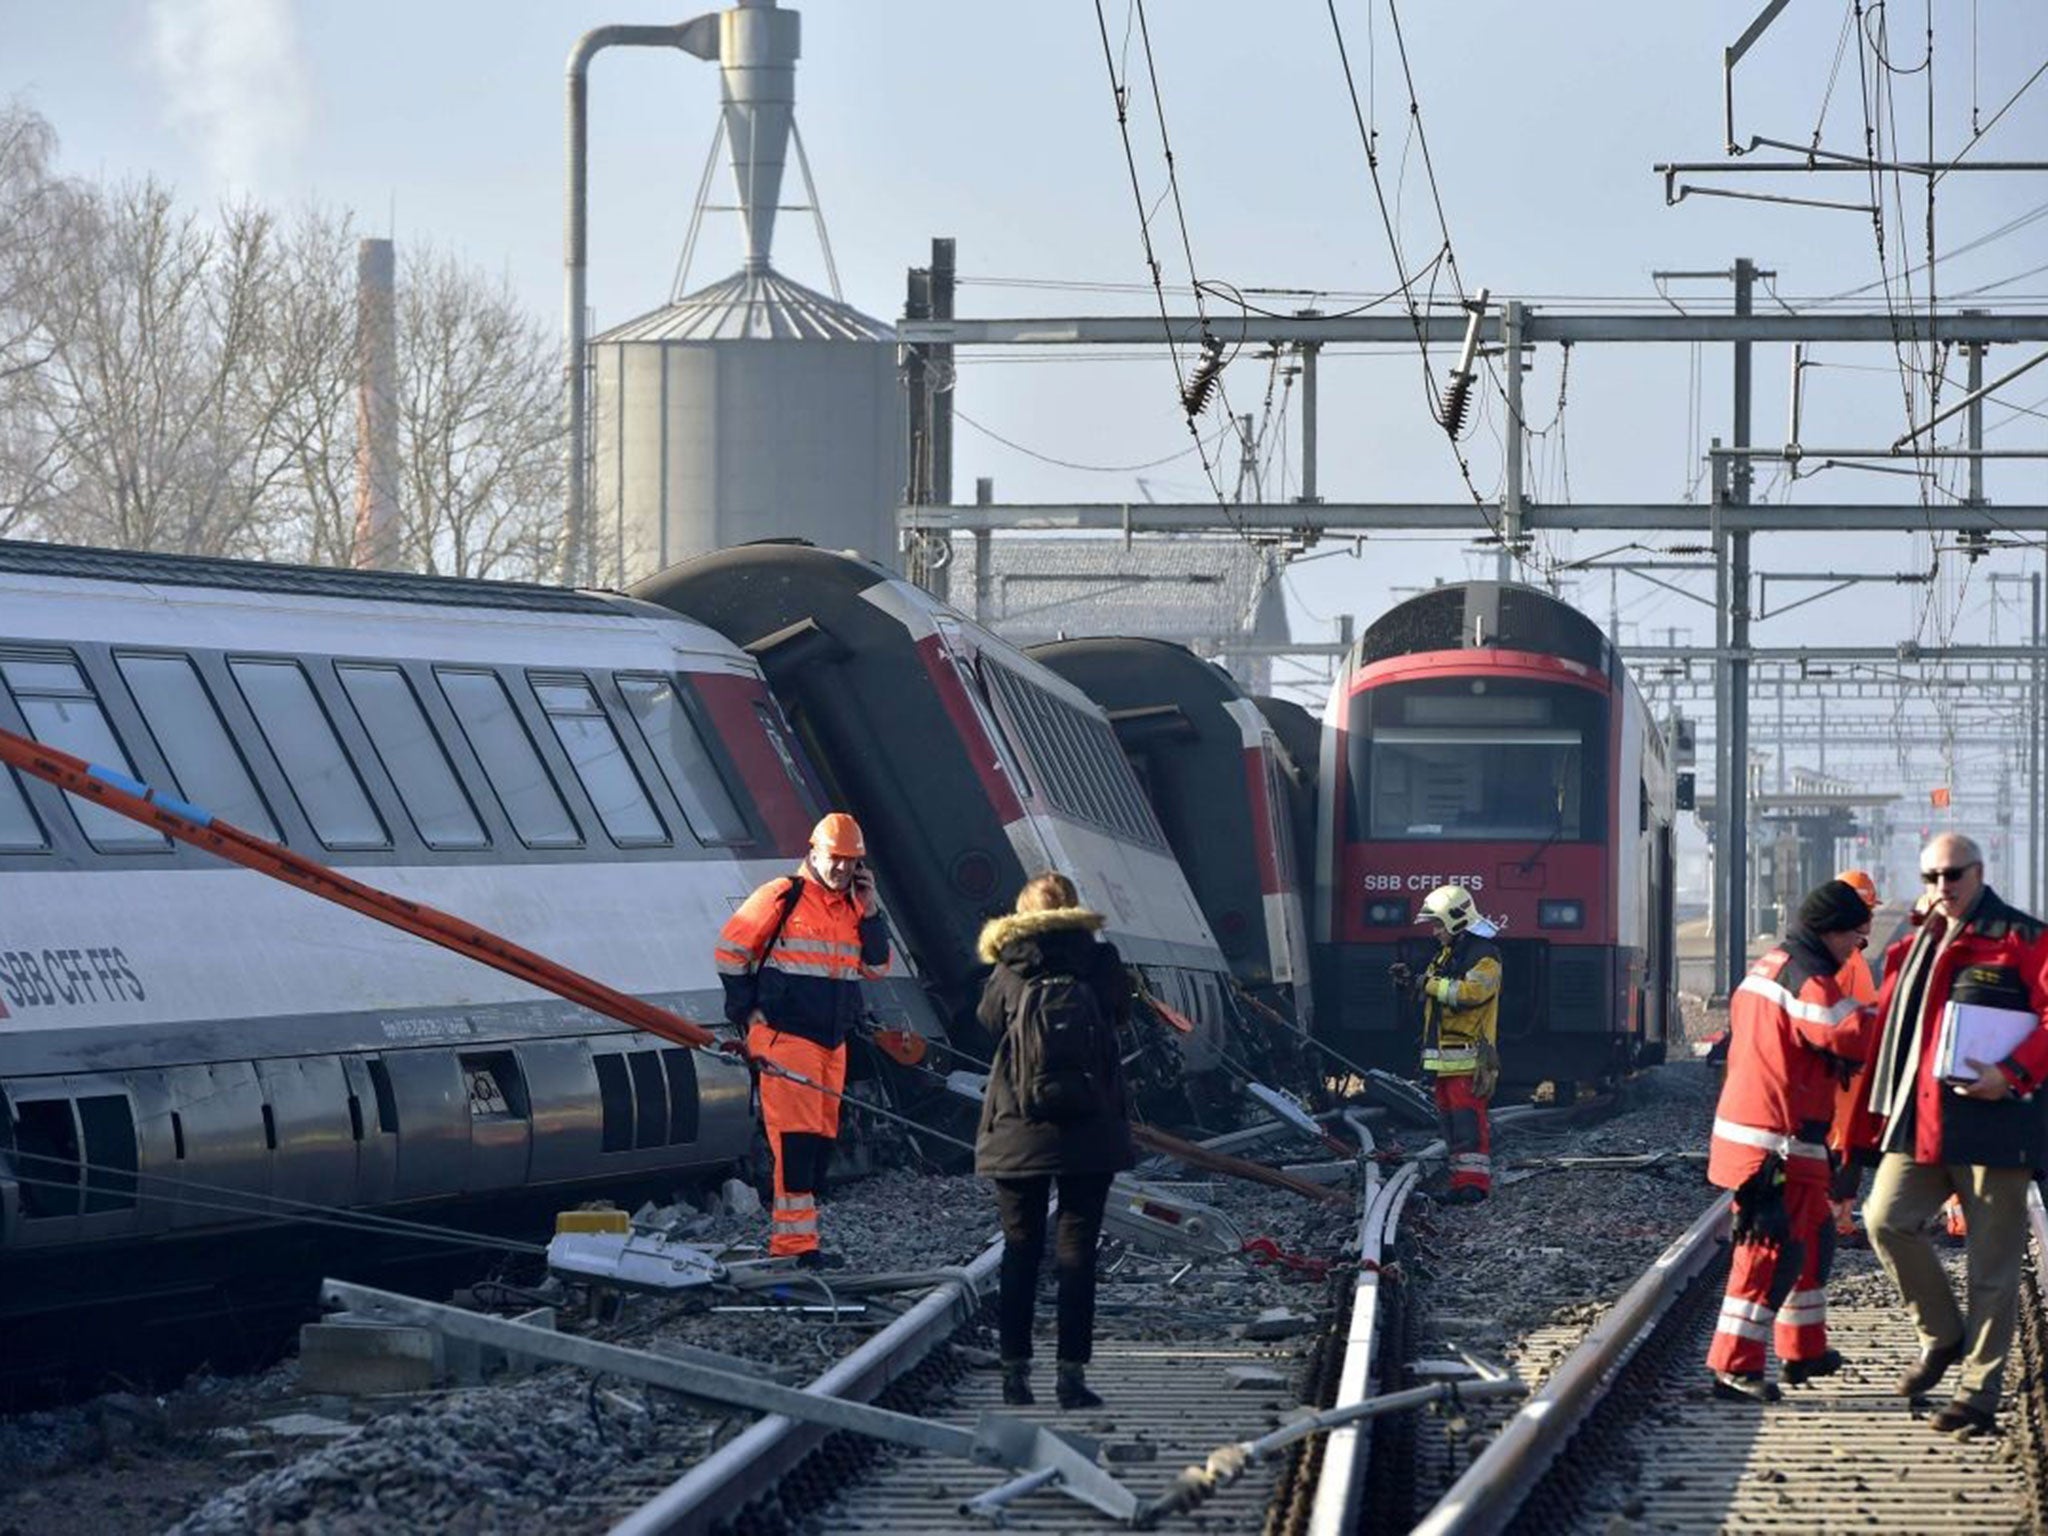 Rescue workers inspect the site of a train crash at the train station of Rafz, northern Switzerland, on February 20, 2015.